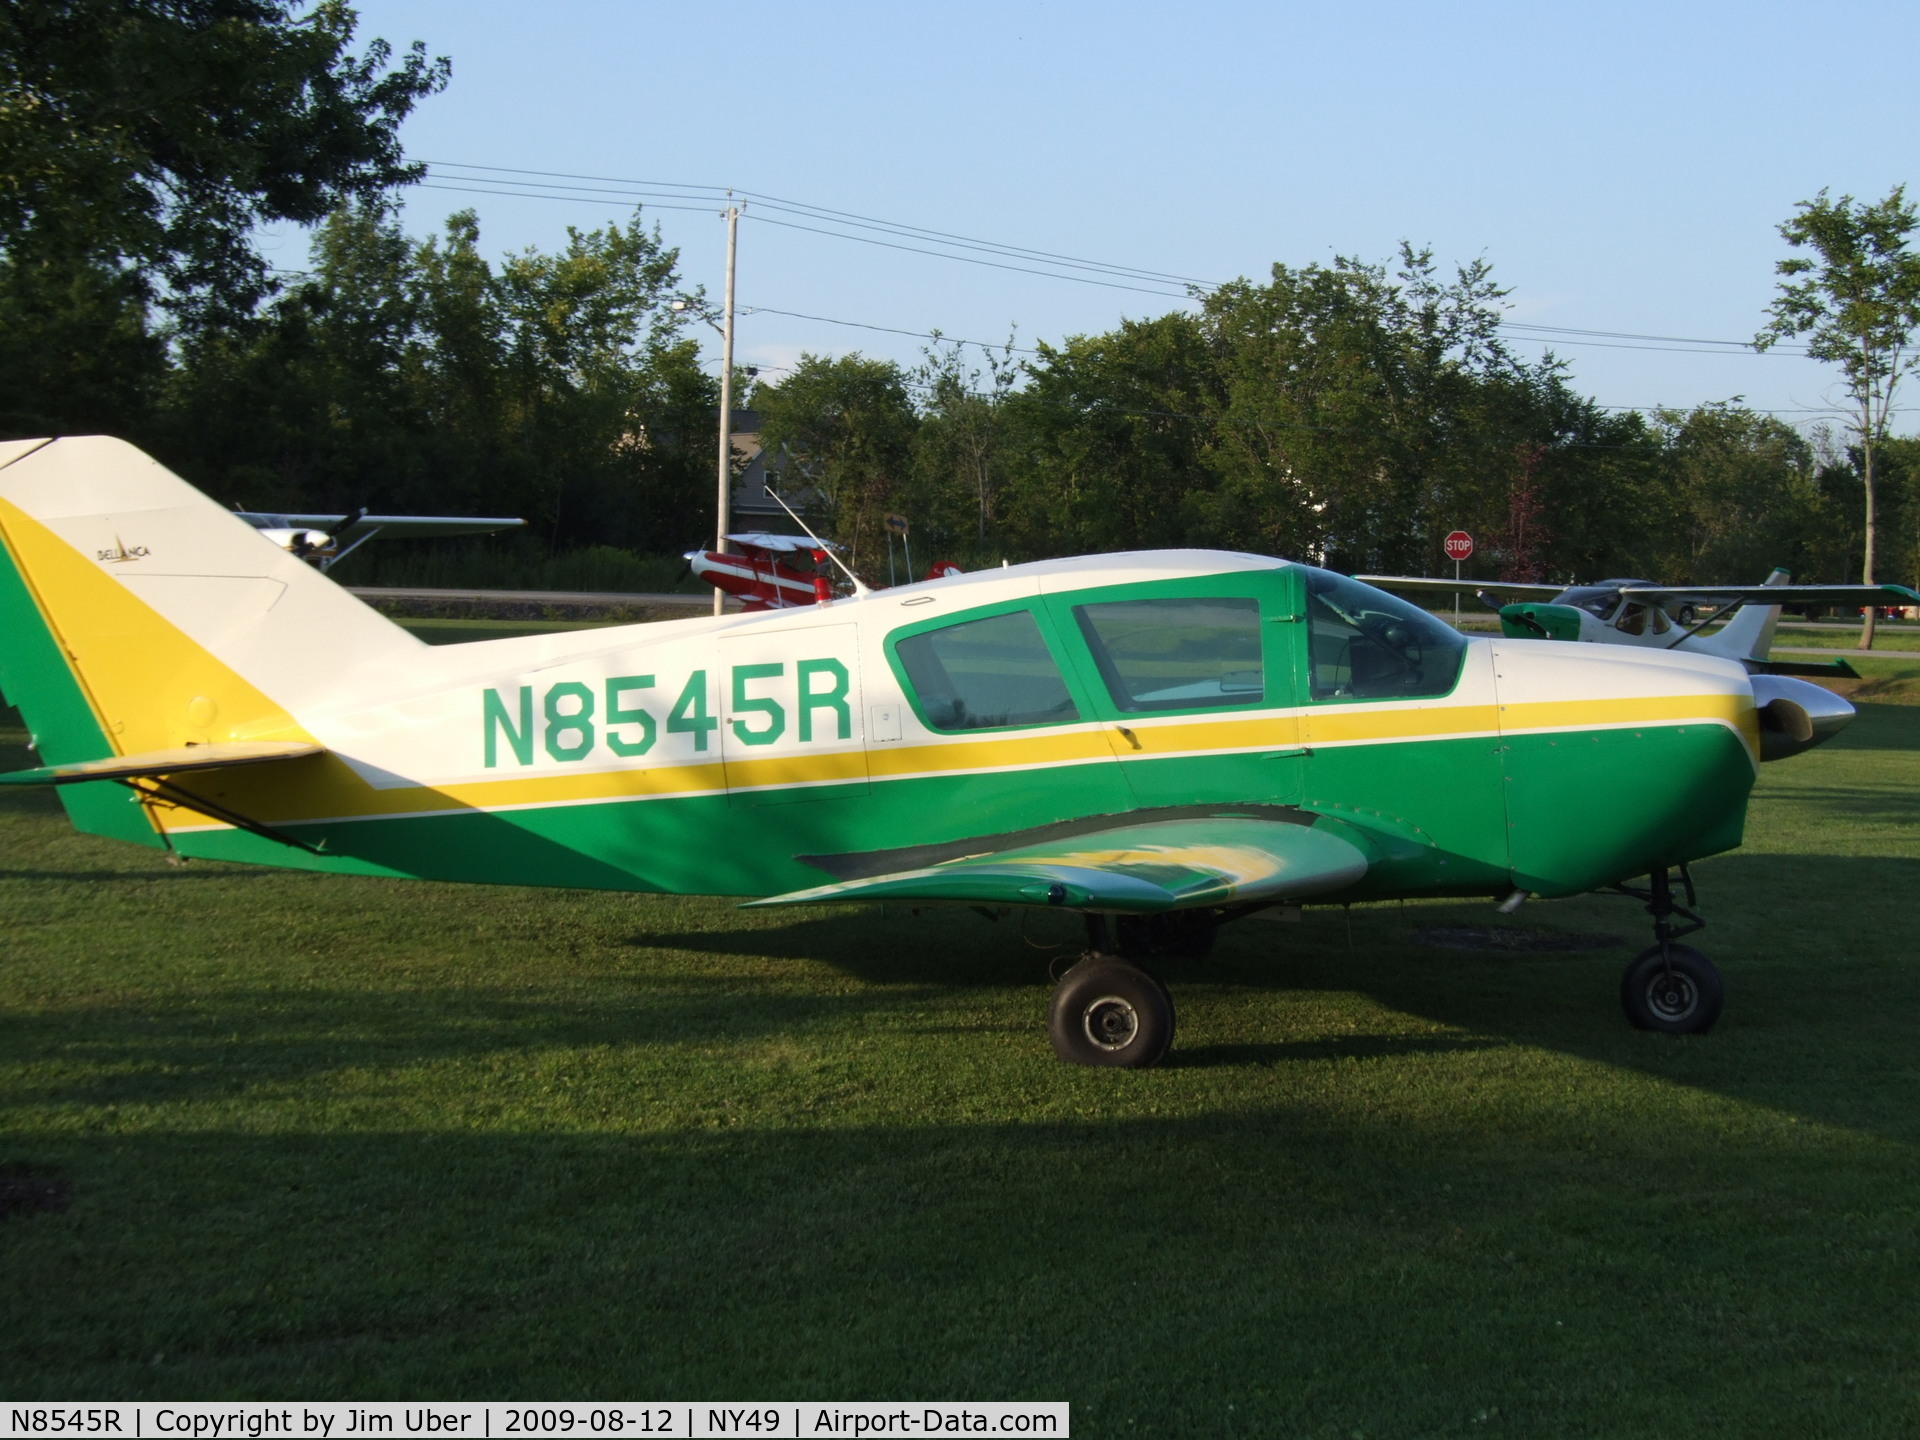 N8545R, 1966 Bellanca 14-19-3 Cruisair Senior C/N 4307, Joe stopped in for the EAA fly-in at NY49- a good time was had by all